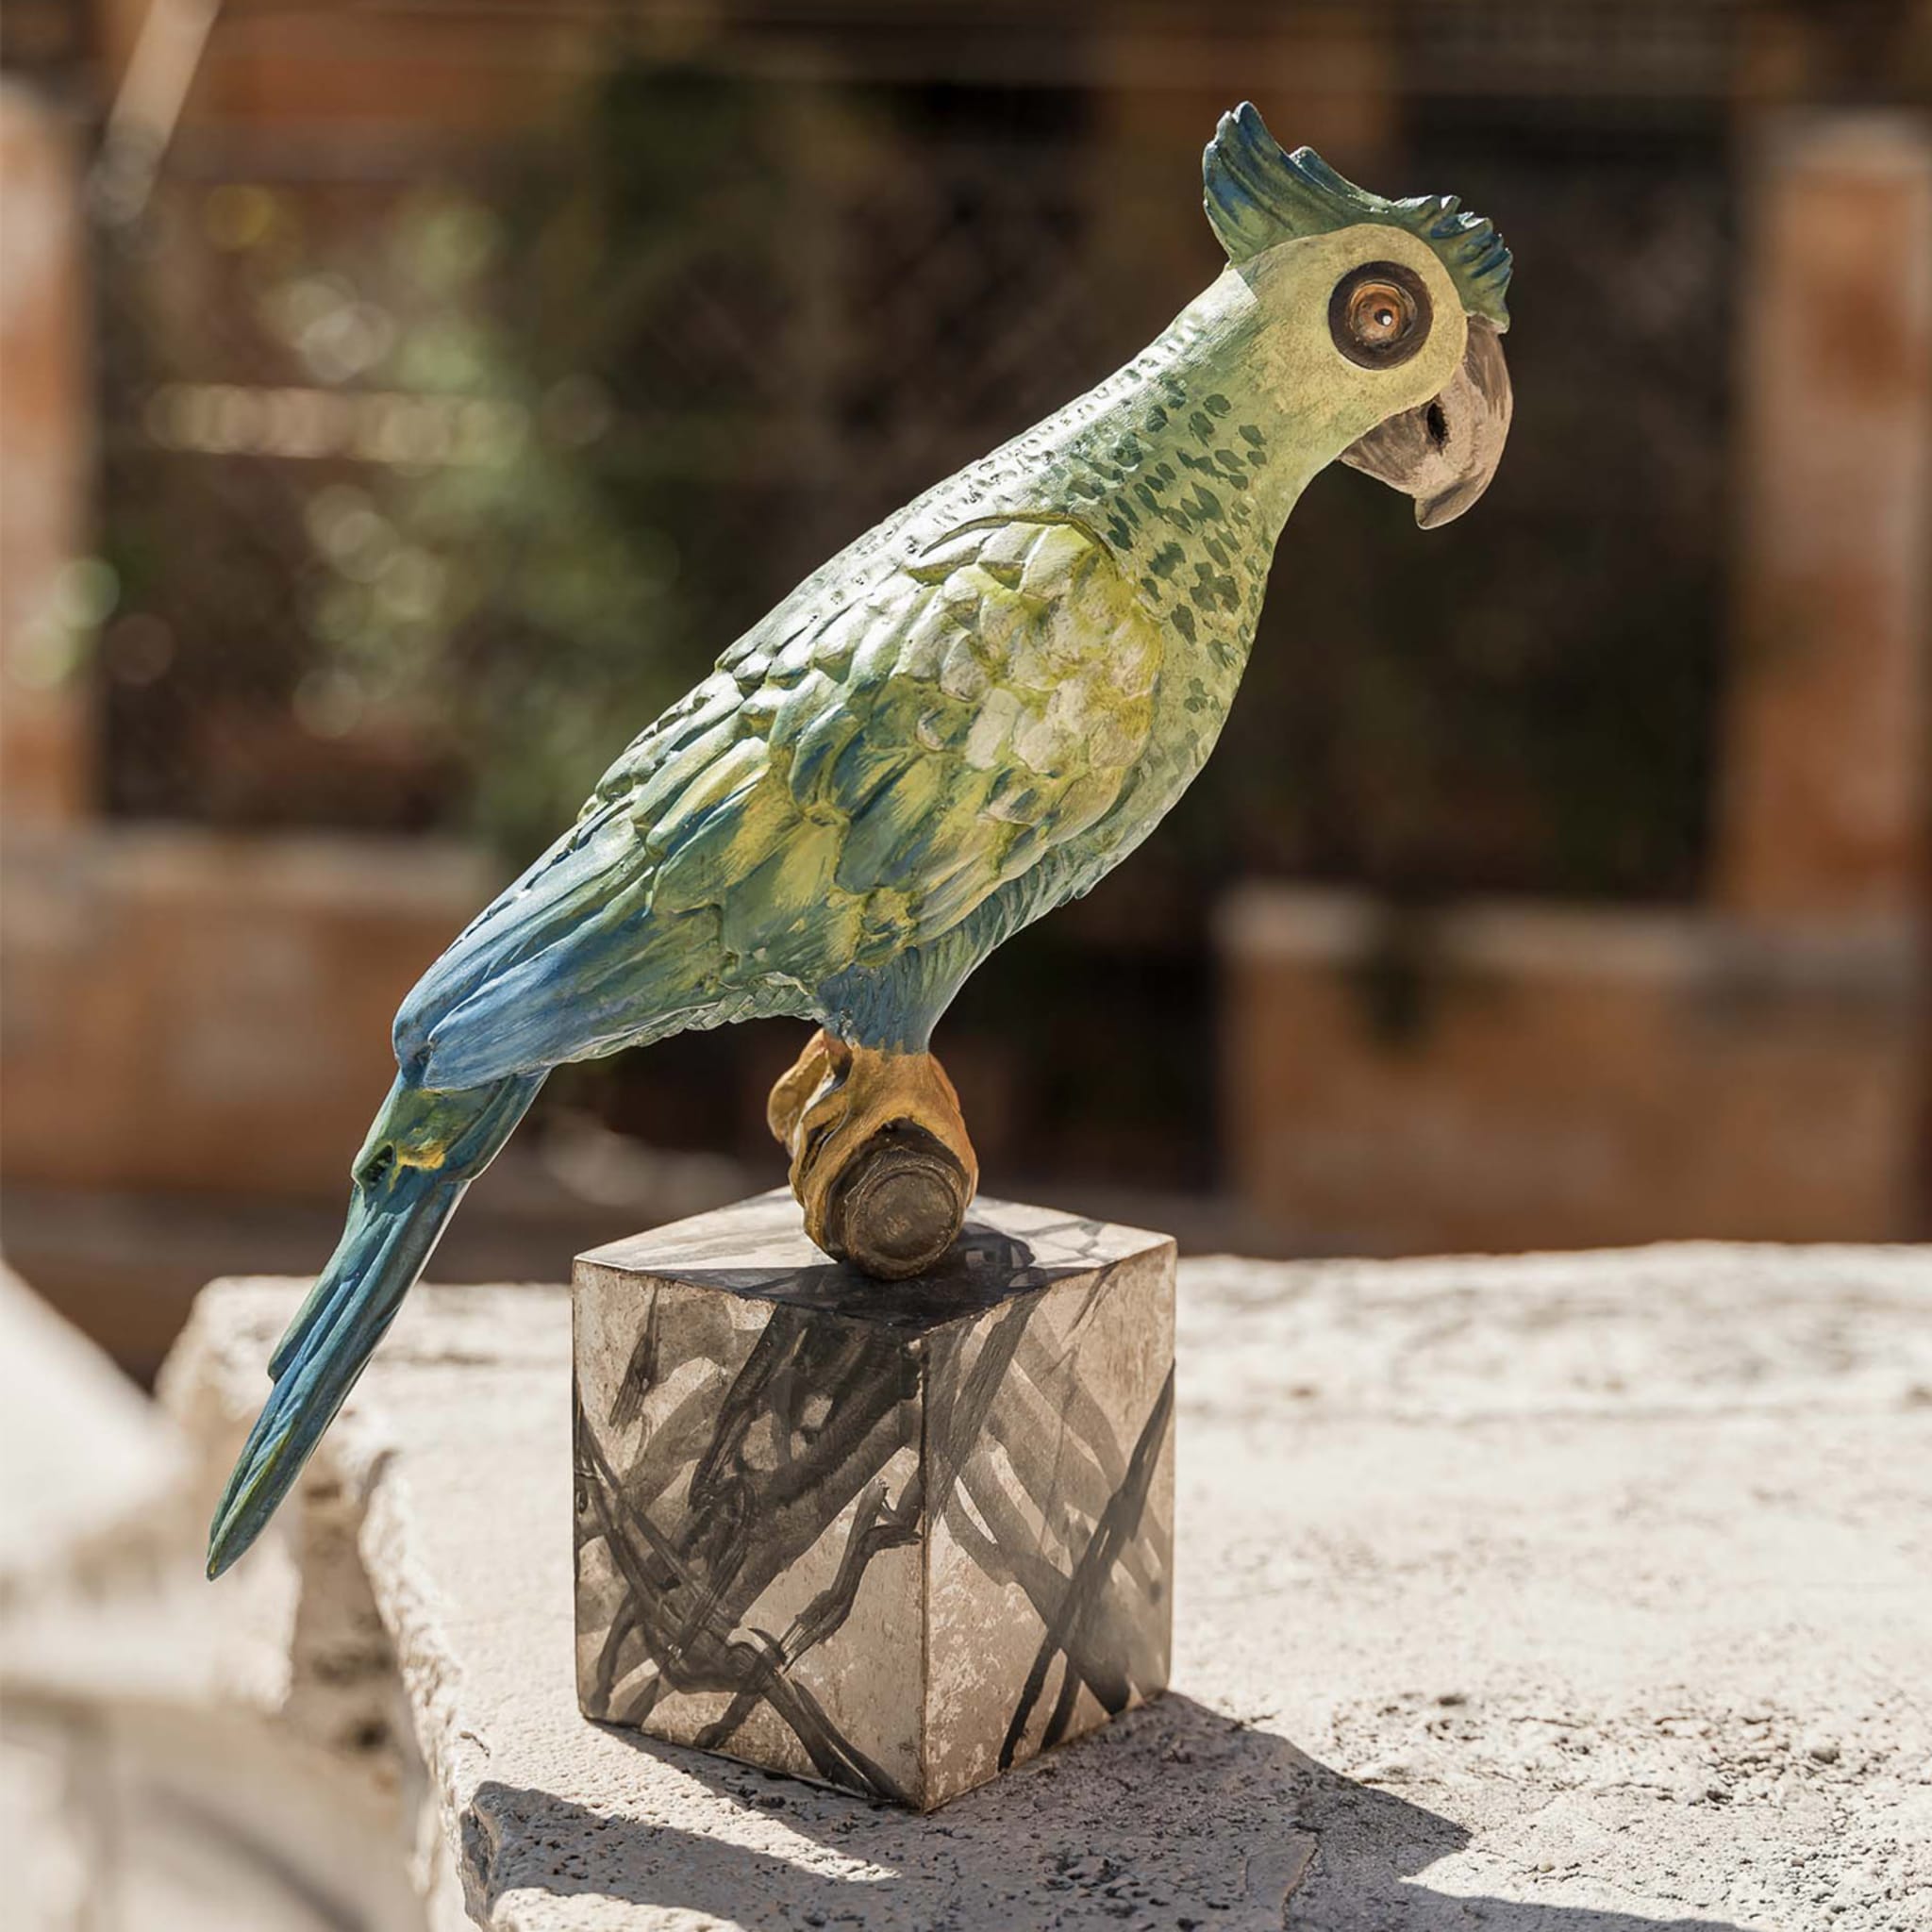 Hand-Painted Parrot in Green - Alternative view 1